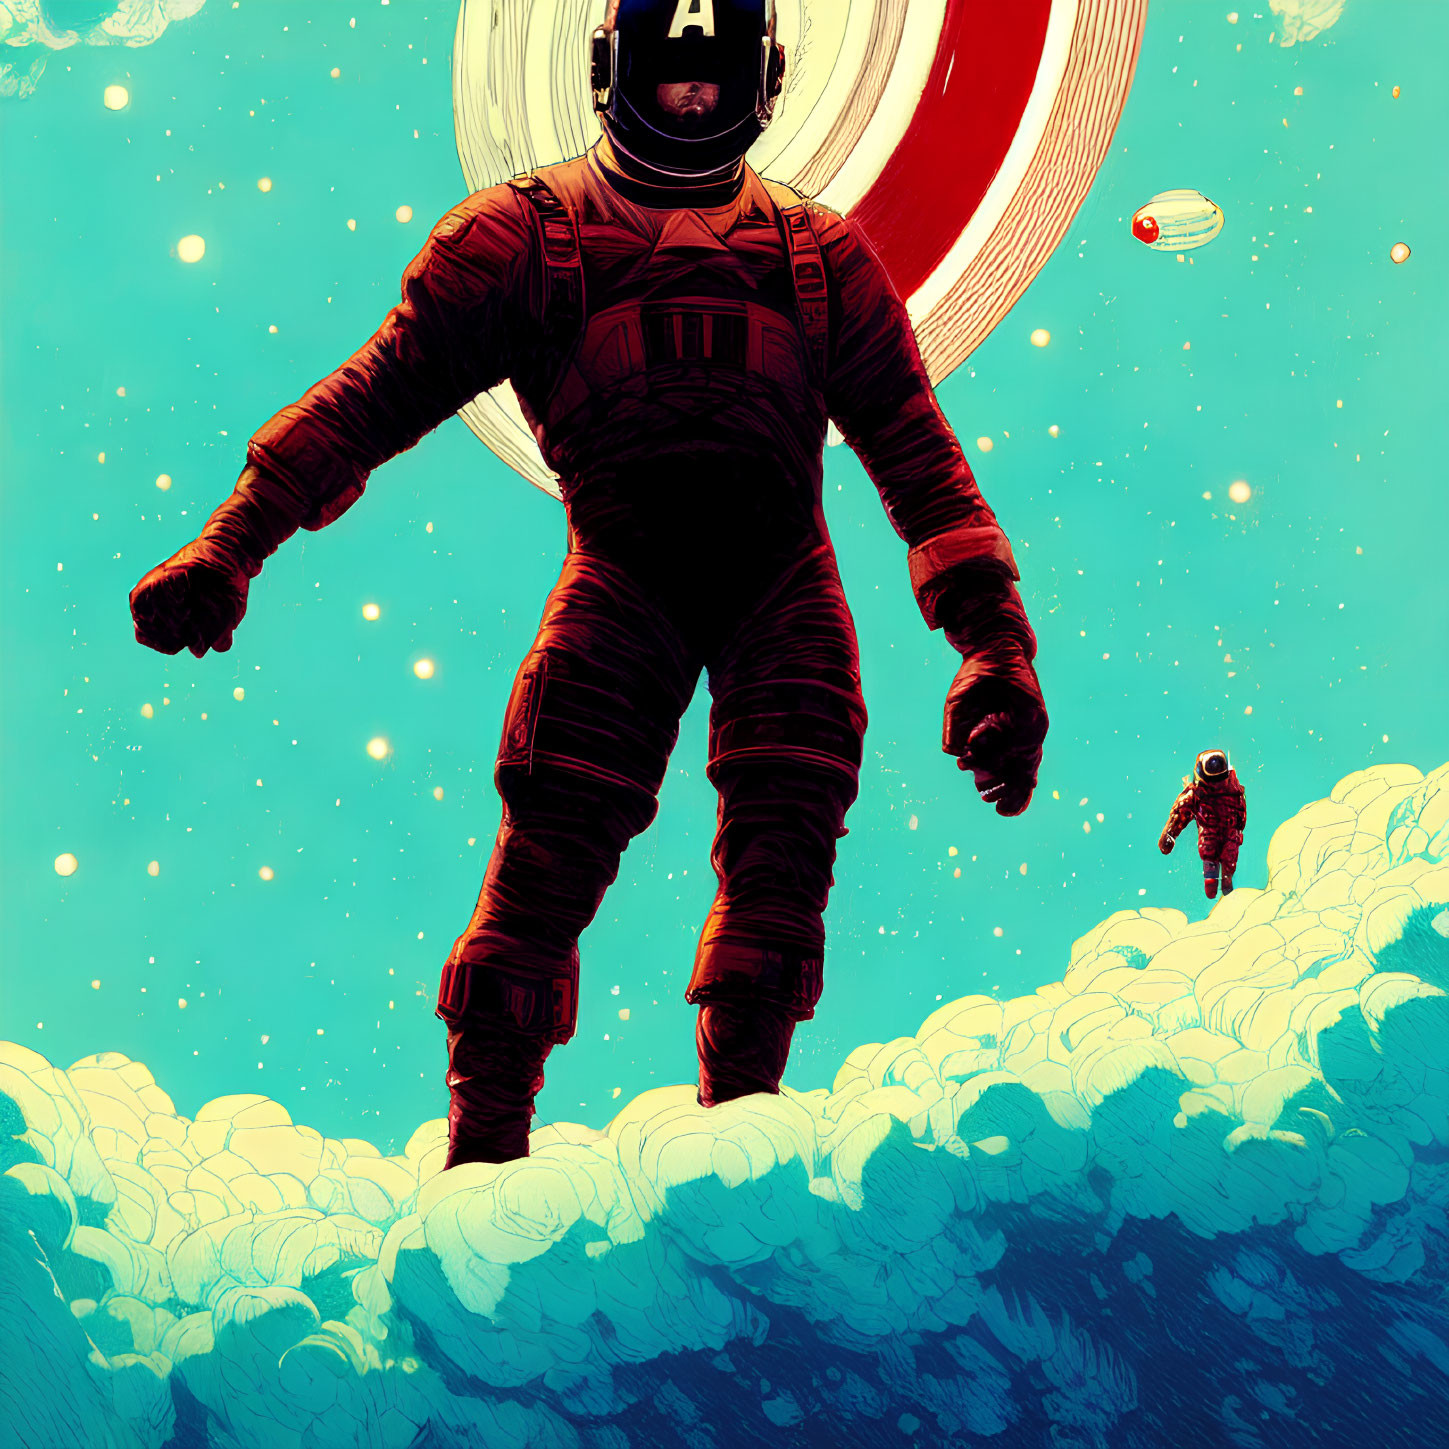 Astronaut floating above clouds with distant planet and another astronaut.